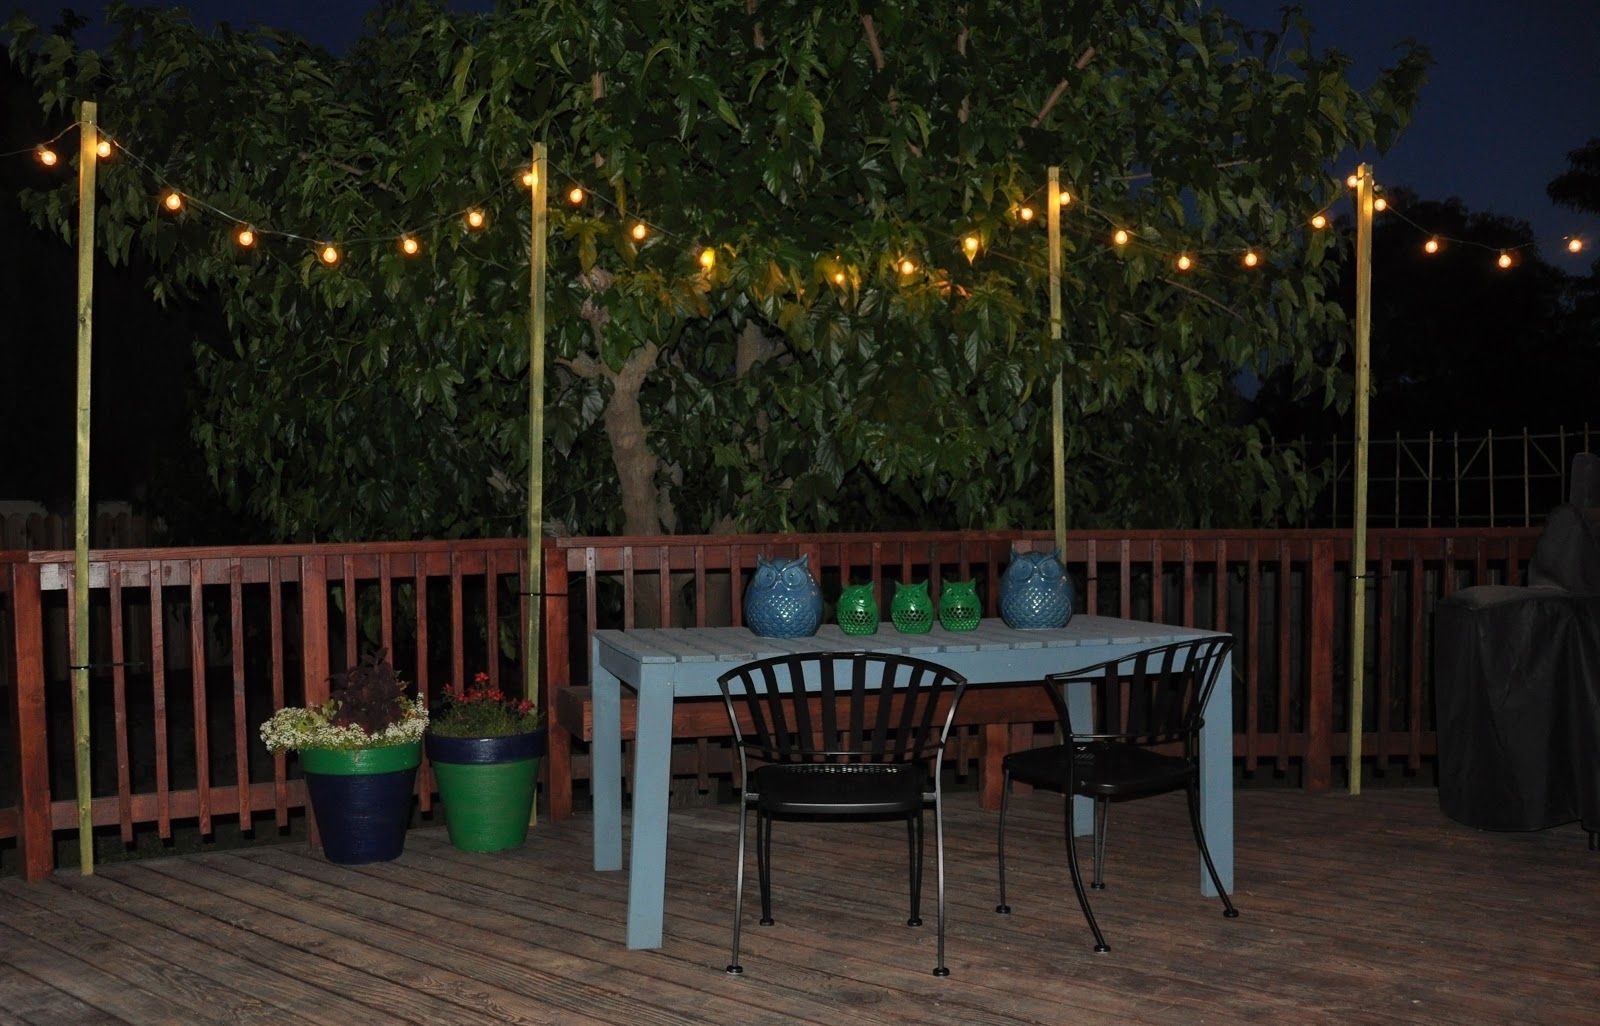 Diy : Outdoor Patio Bulb Lights Home Landscapings Hanging String Intended For Outdoor Hanging String Lights From Australia (View 12 of 15)